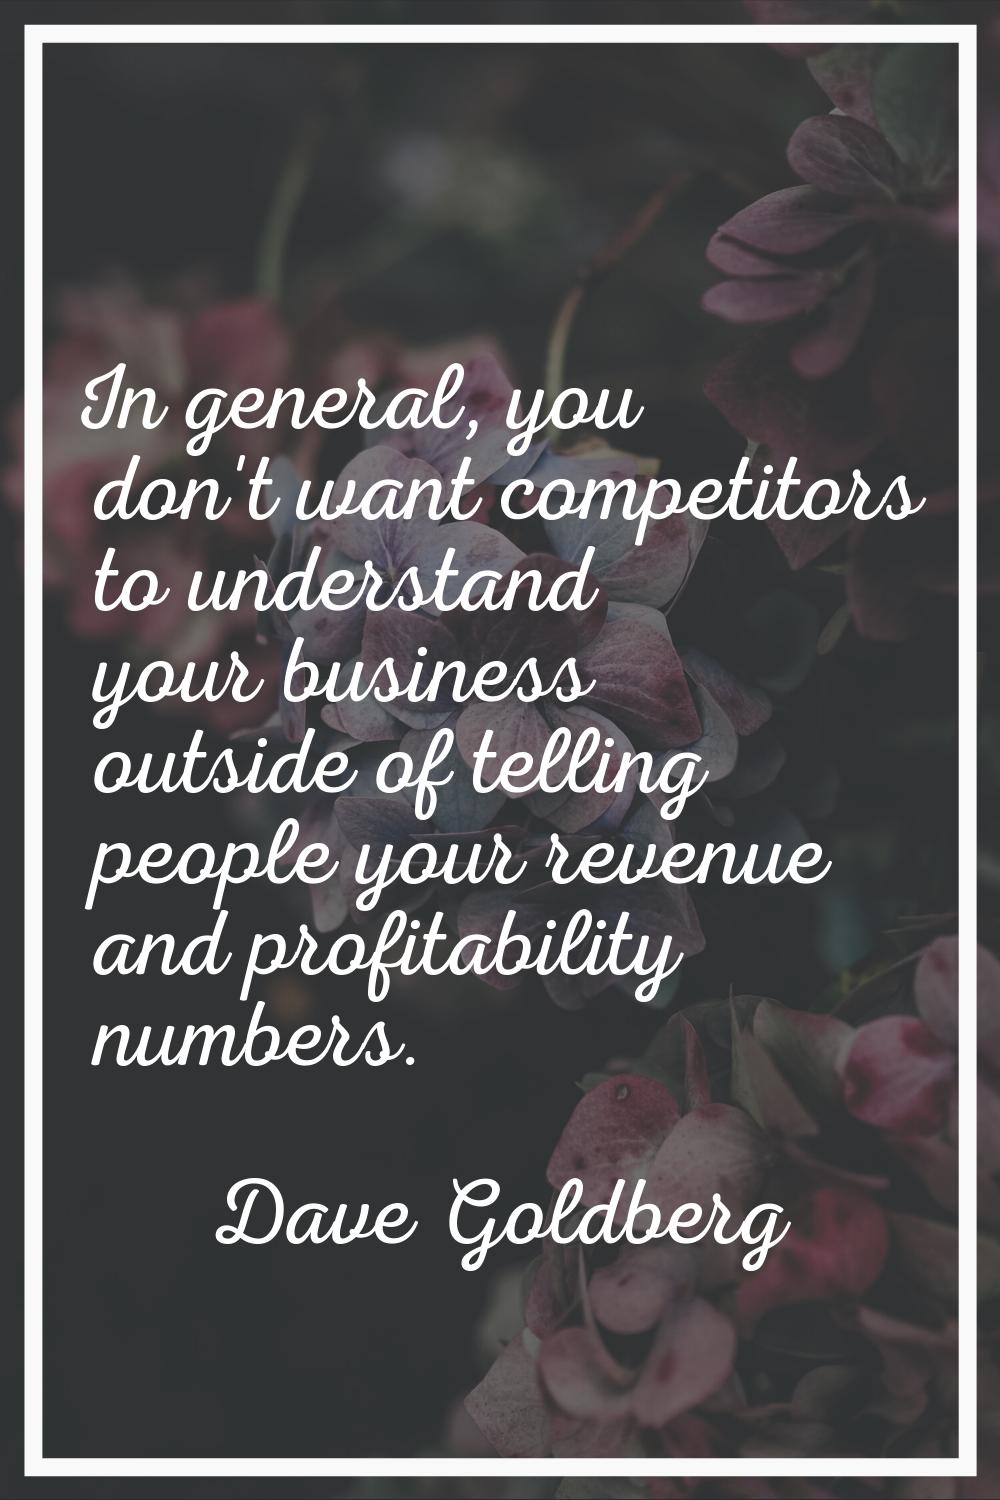 In general, you don't want competitors to understand your business outside of telling people your r